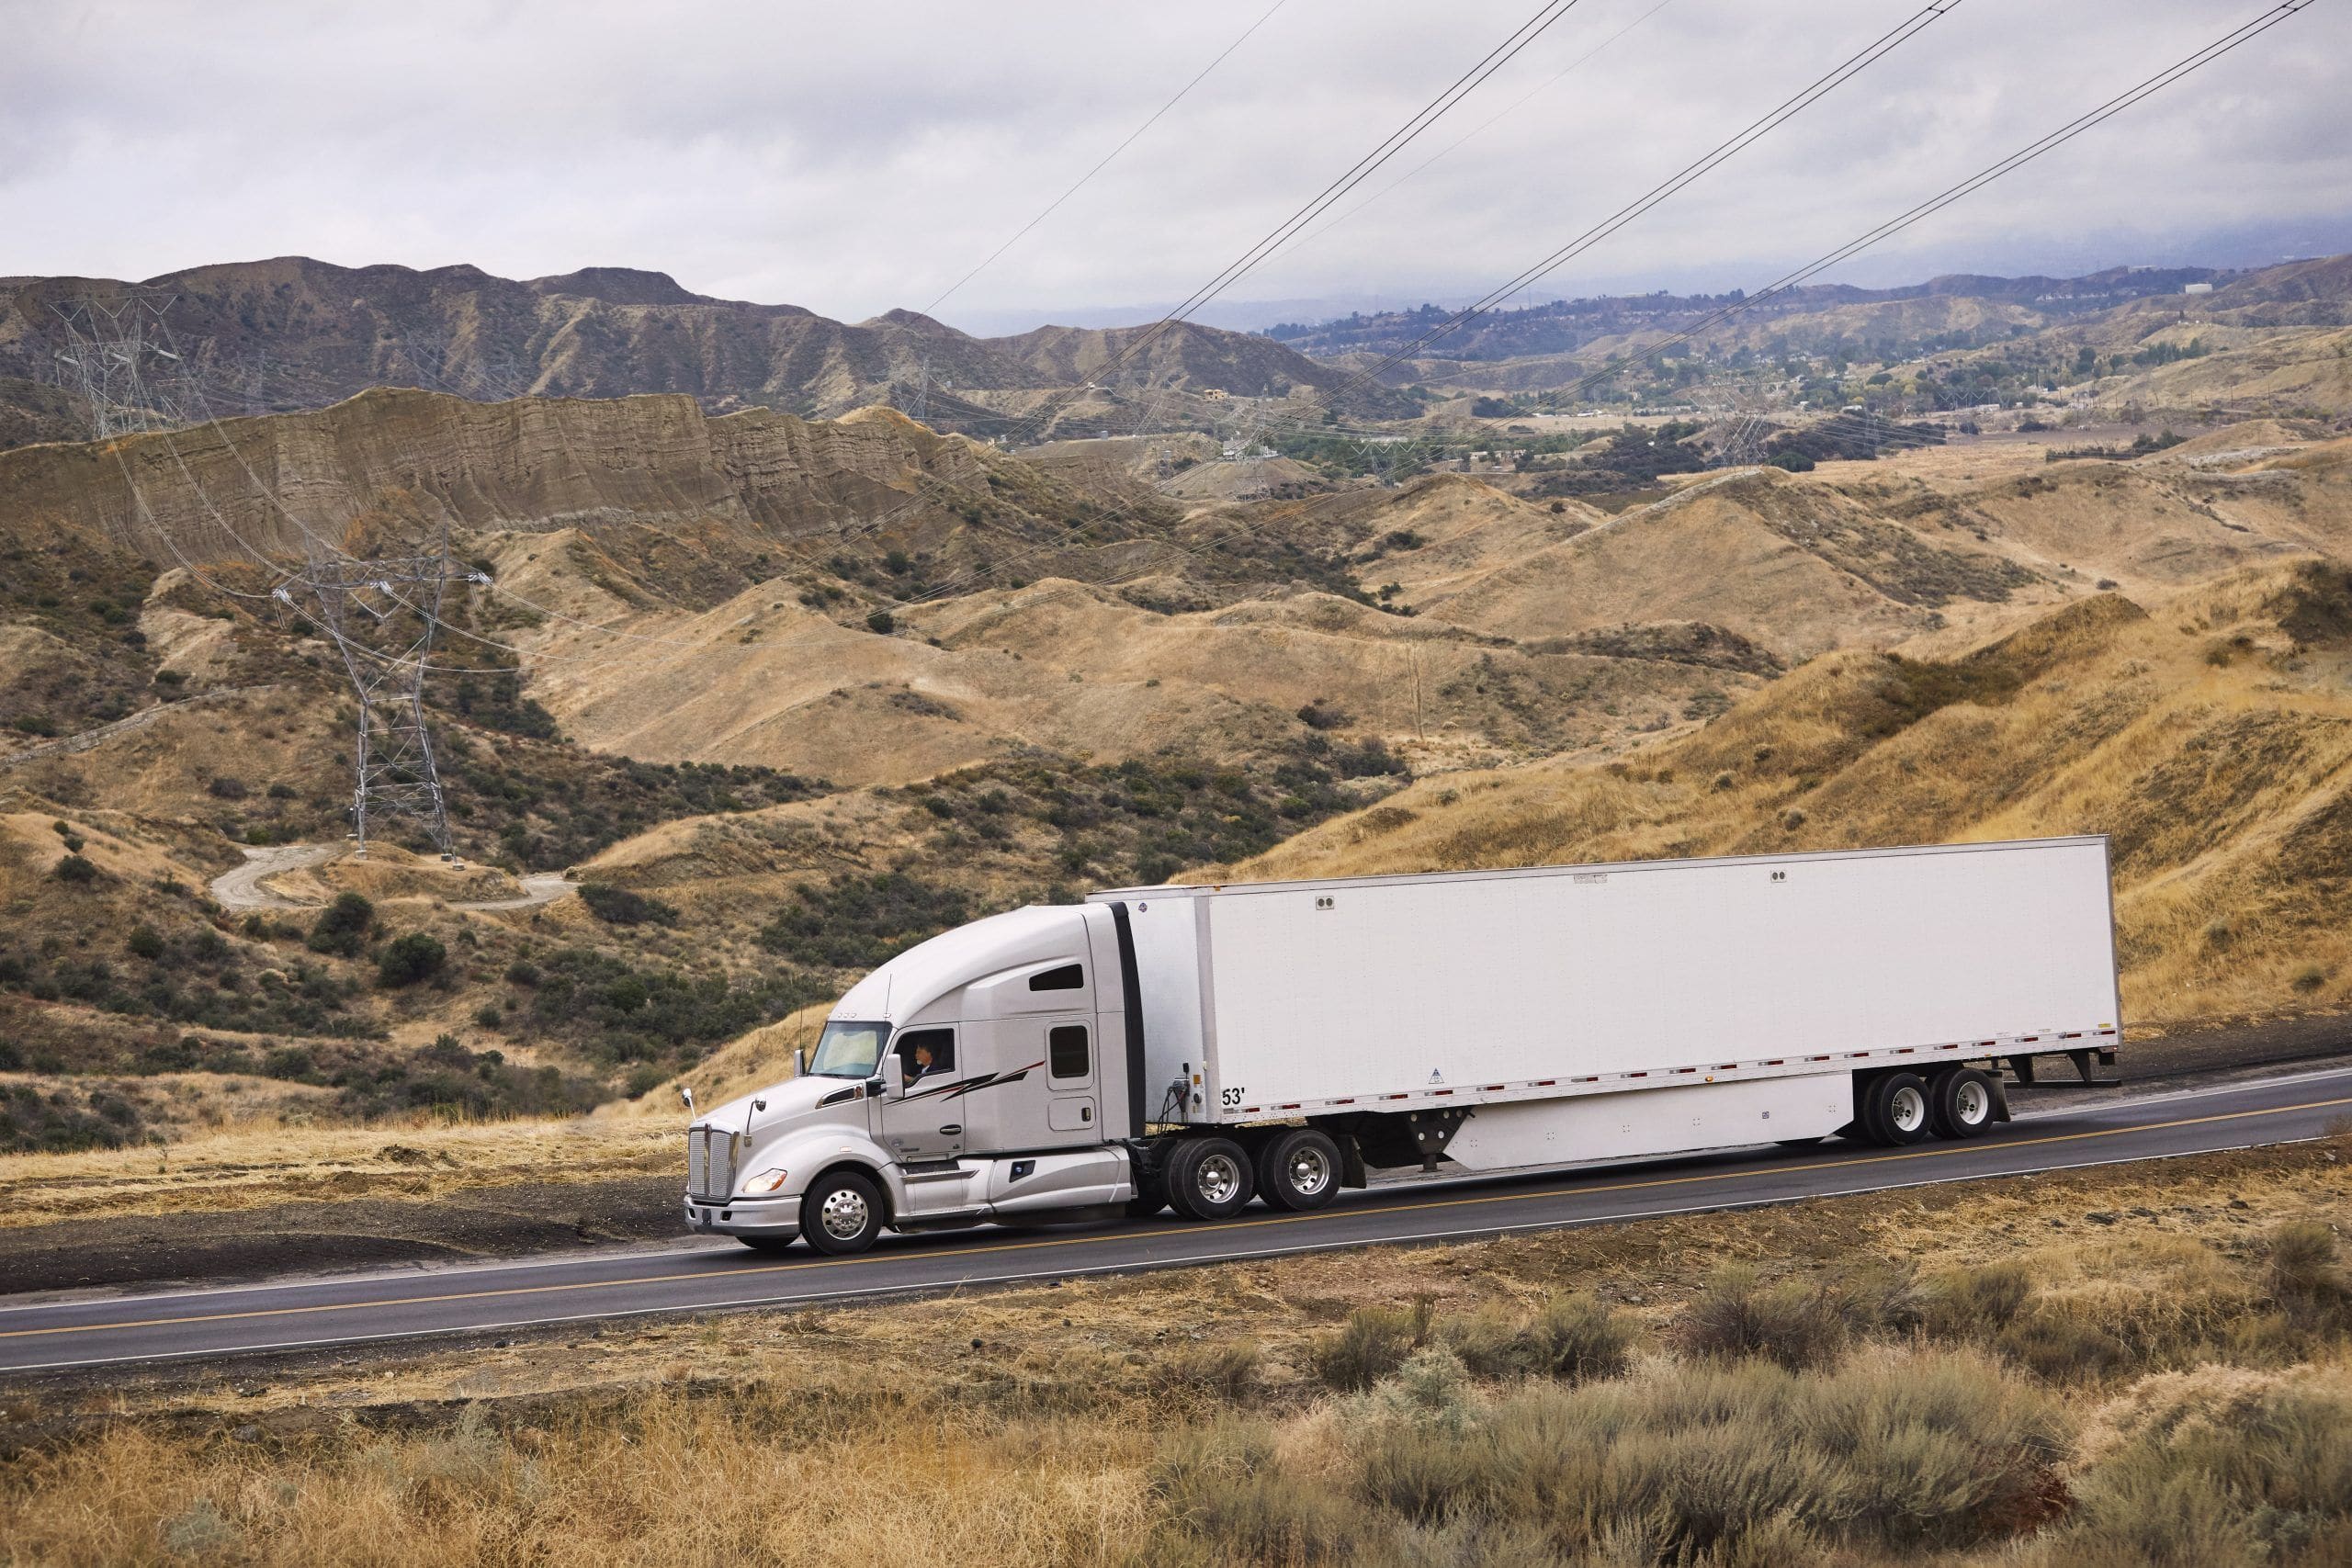 A journey to truck ownership through the Uber Freight Plus program